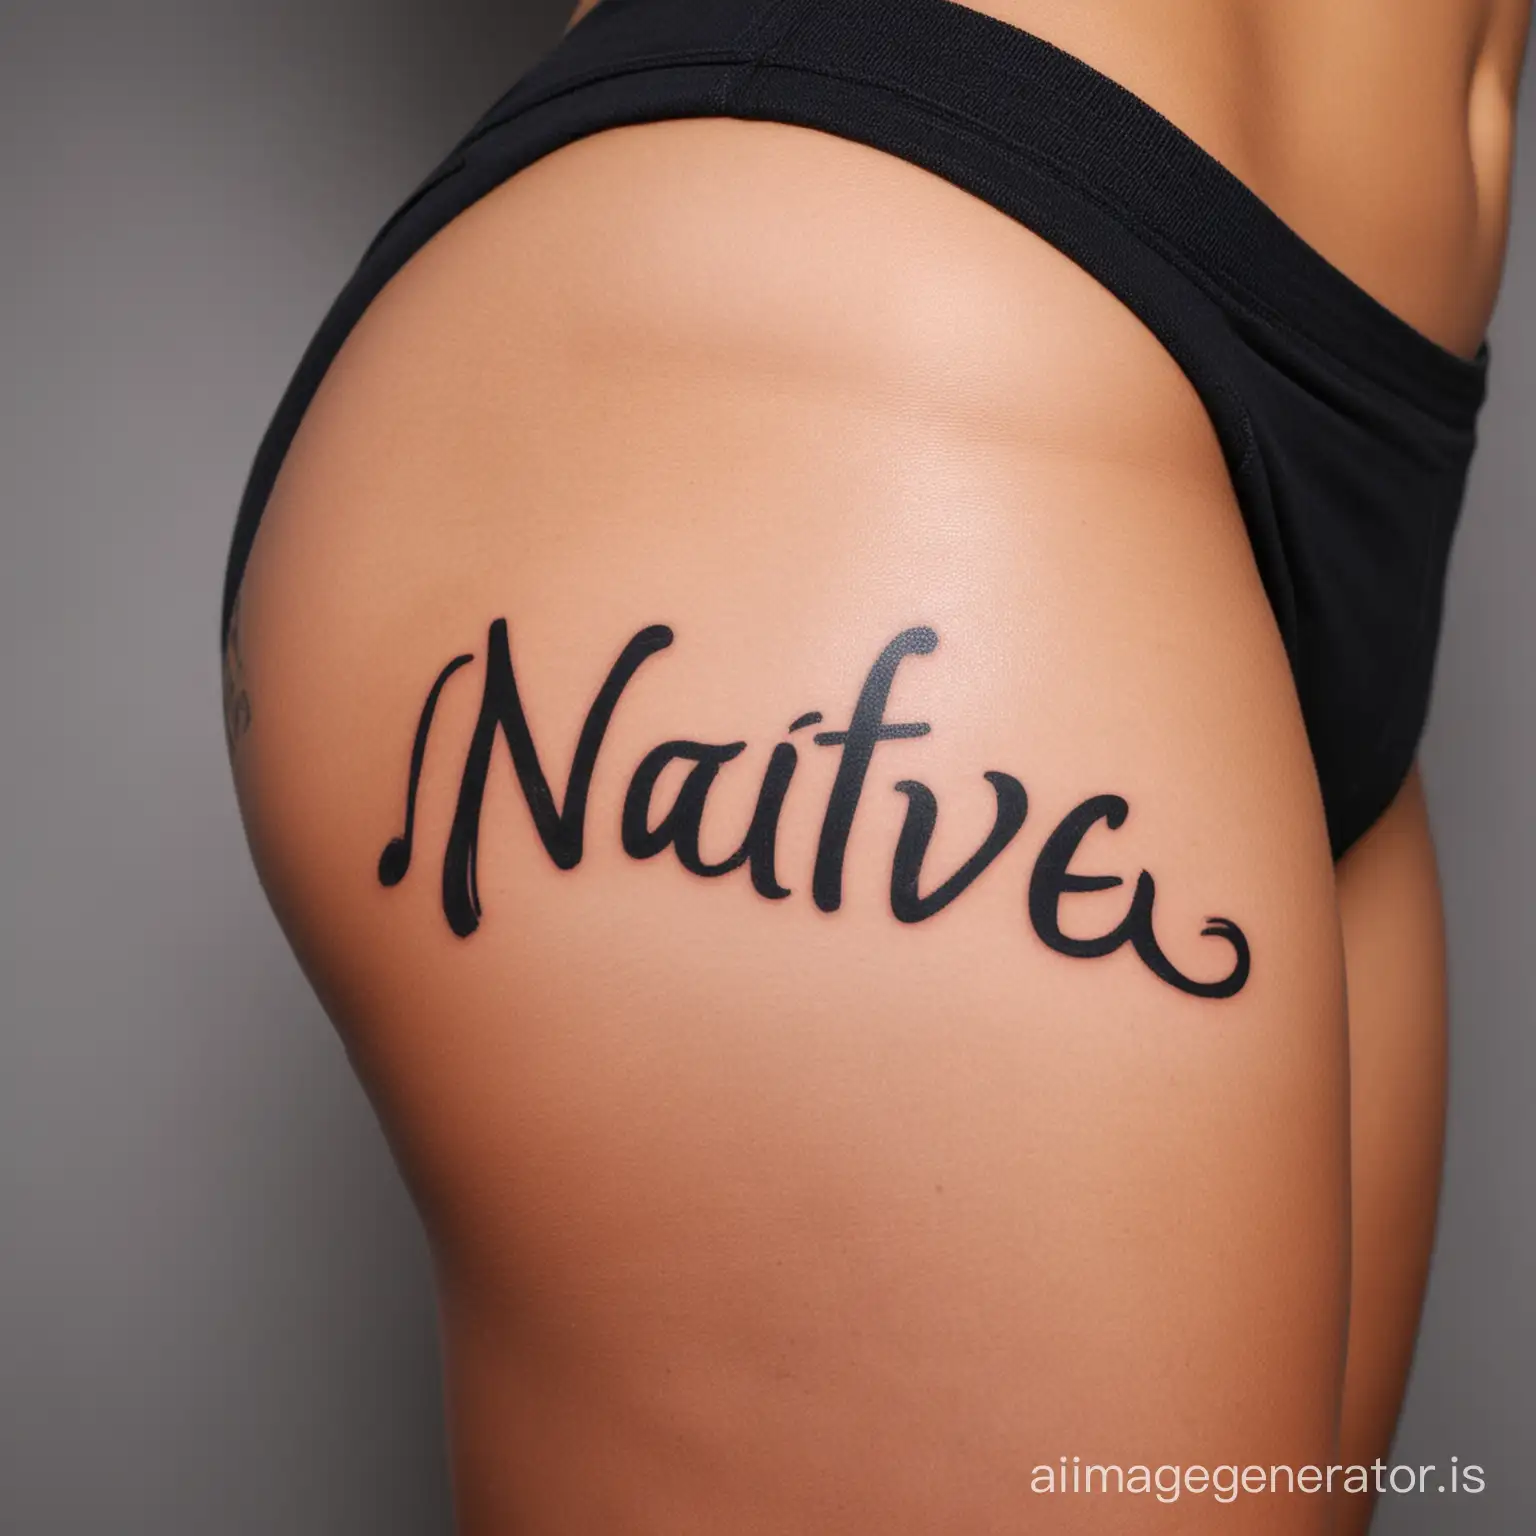 The words Native Naka tattooed on a Latin girl's inner thigh